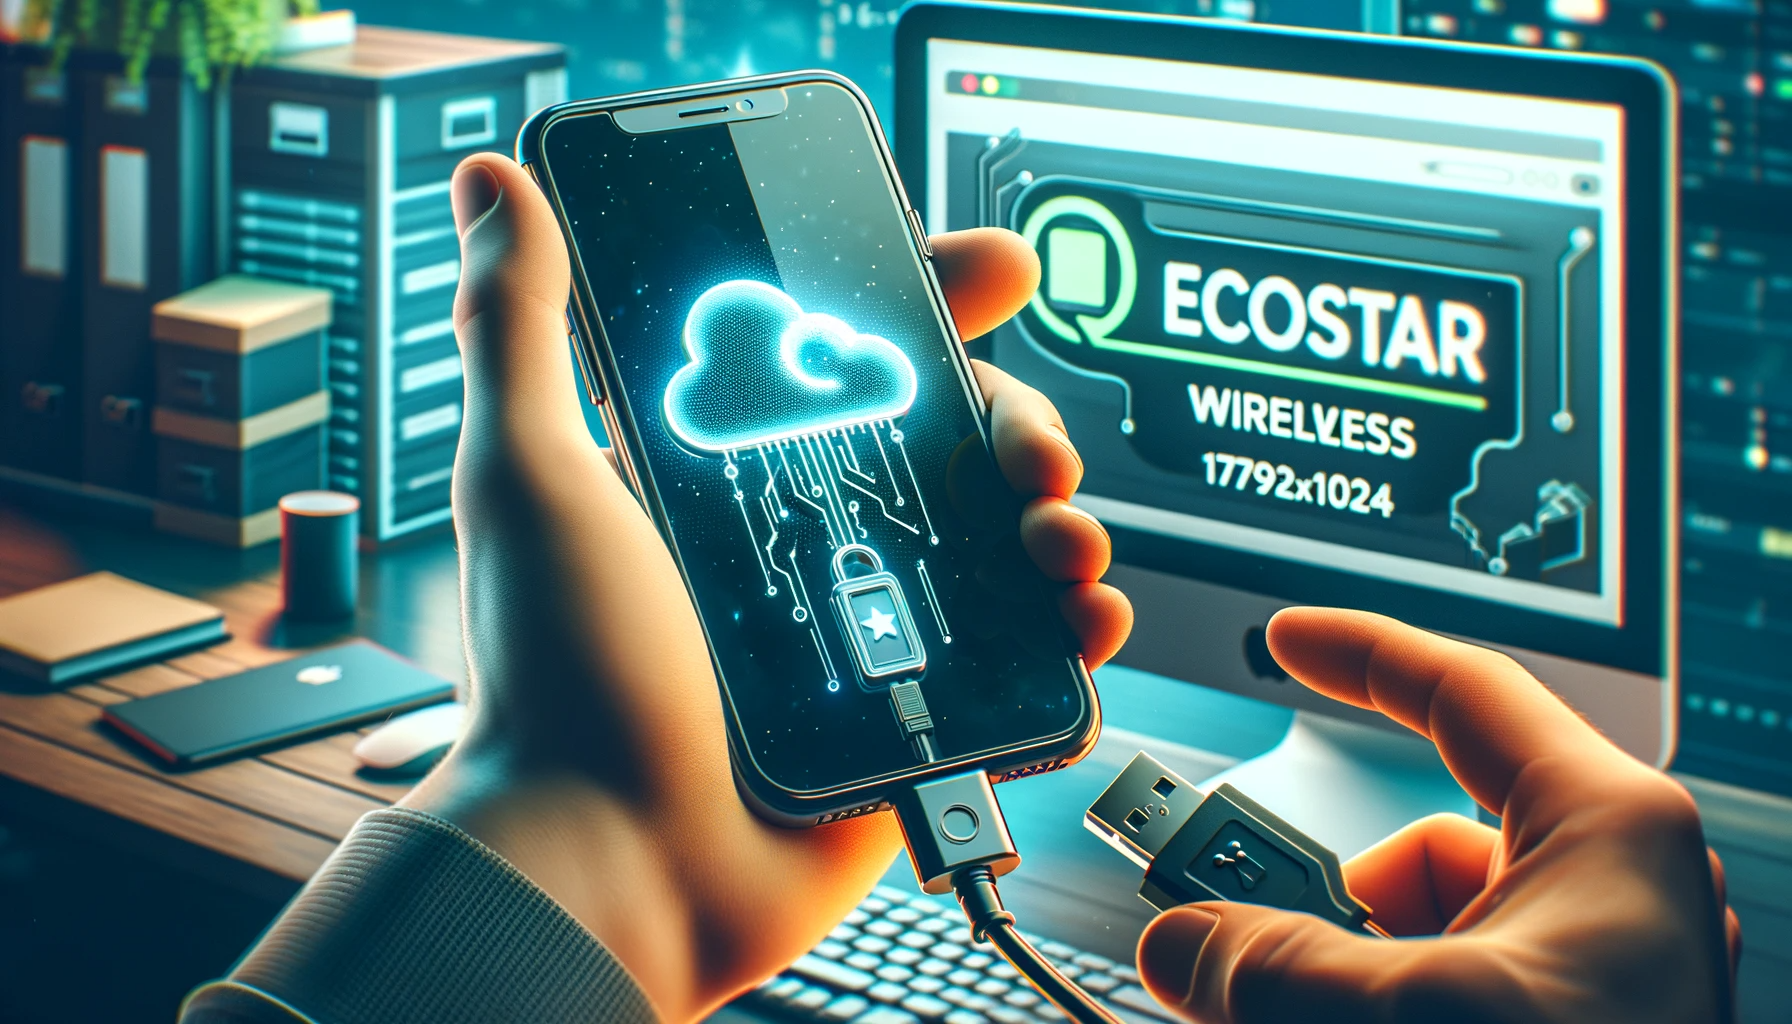 Person holding an iPhone with iCloud symbol and USB connection to a computer, with Ecostar Wireless sign in the background.